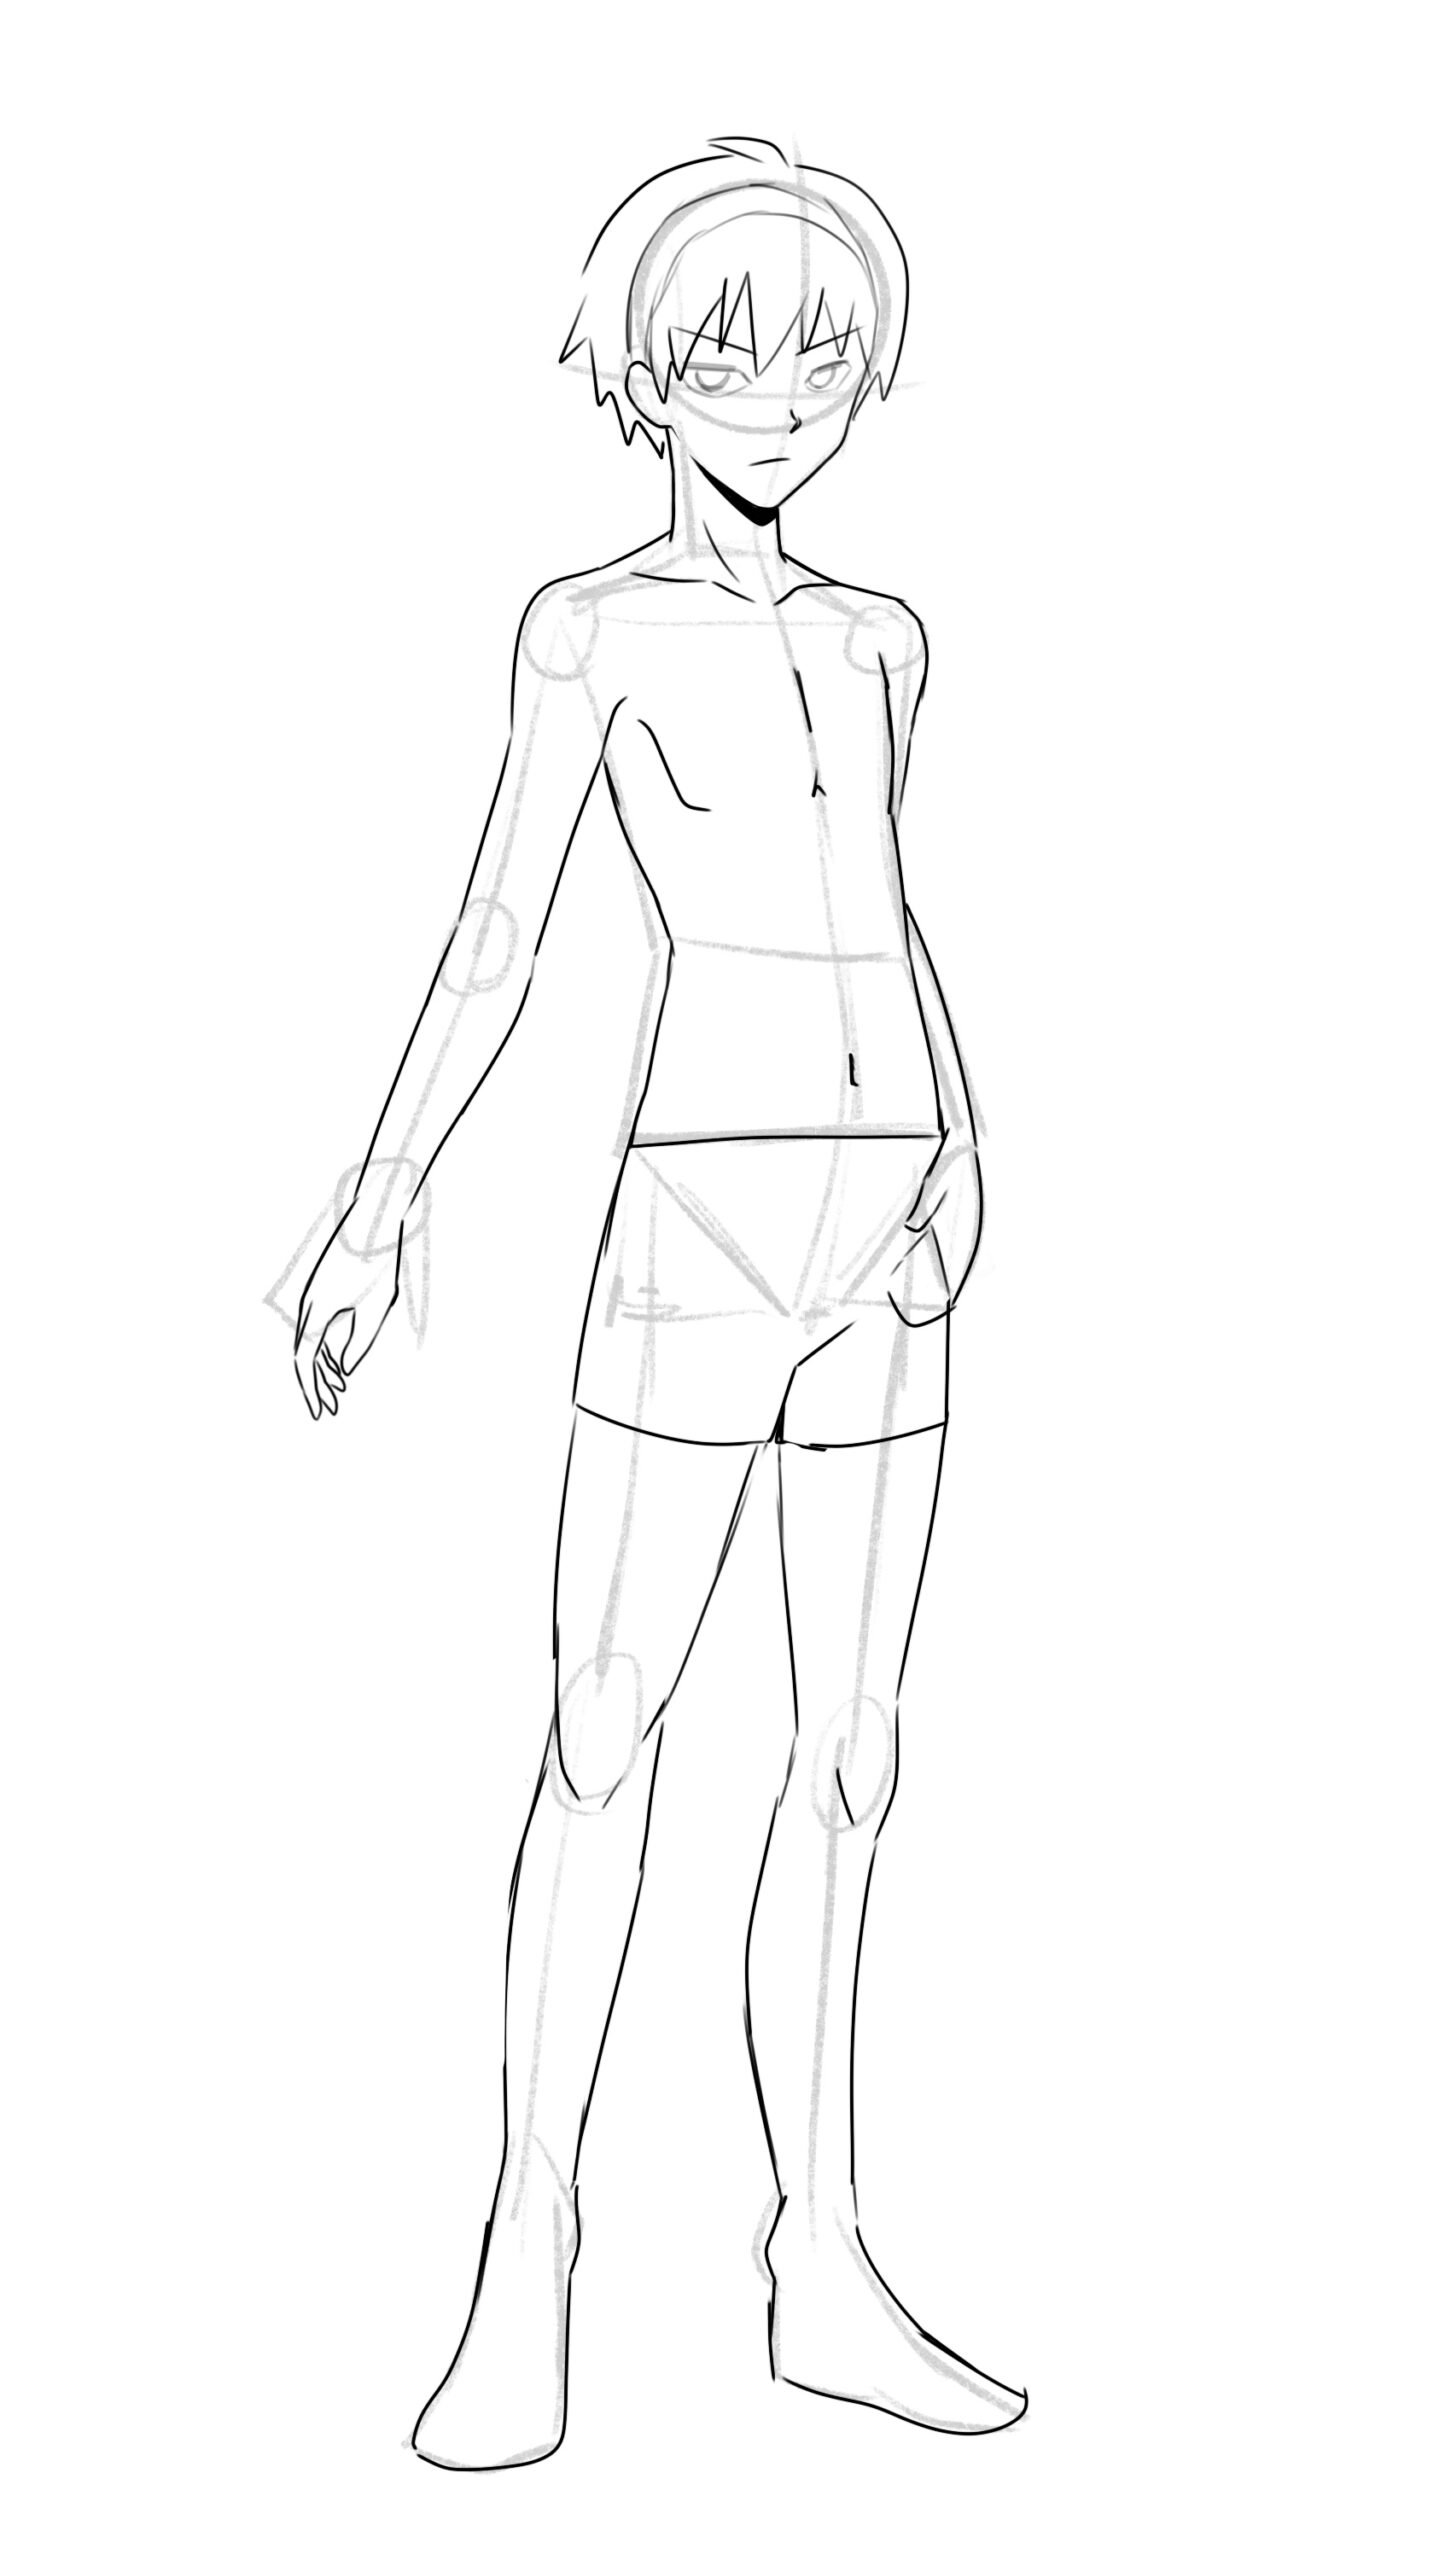 2) Outline body, arms, legs, face and neck etc